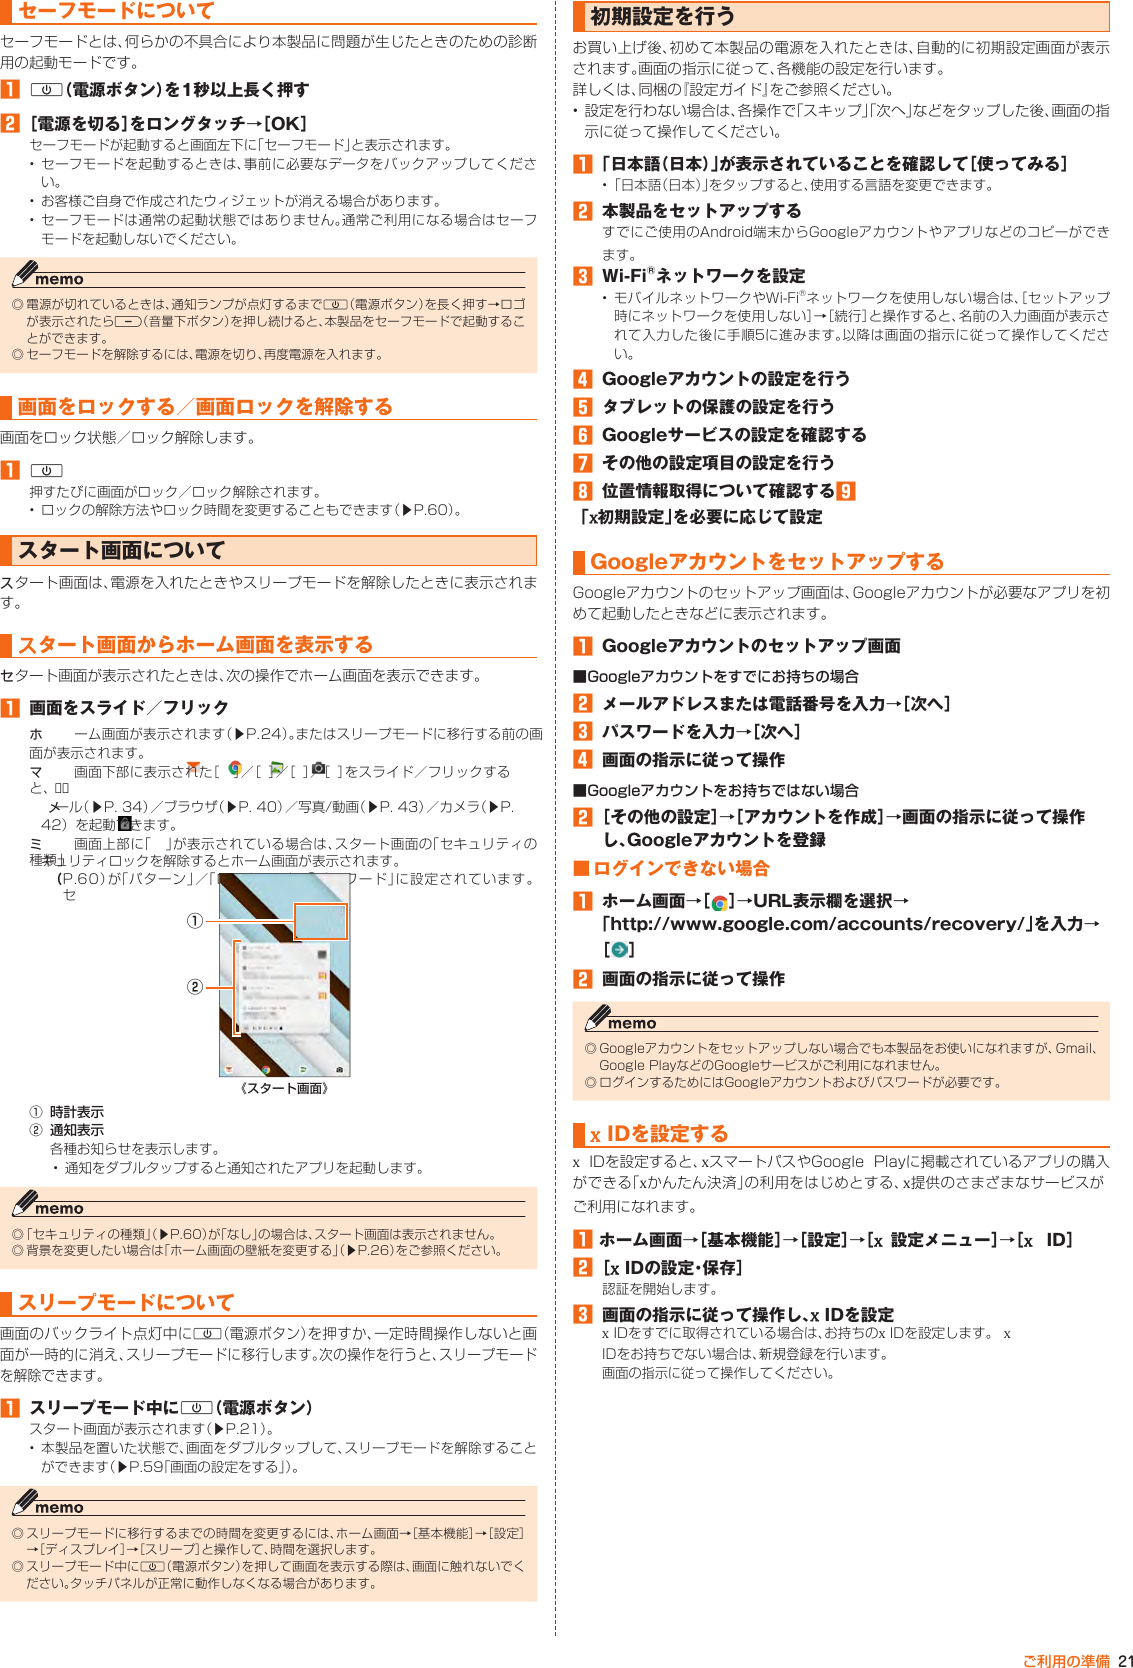 Page 20 of Kyocera FA51 Tablet User Manual part 2